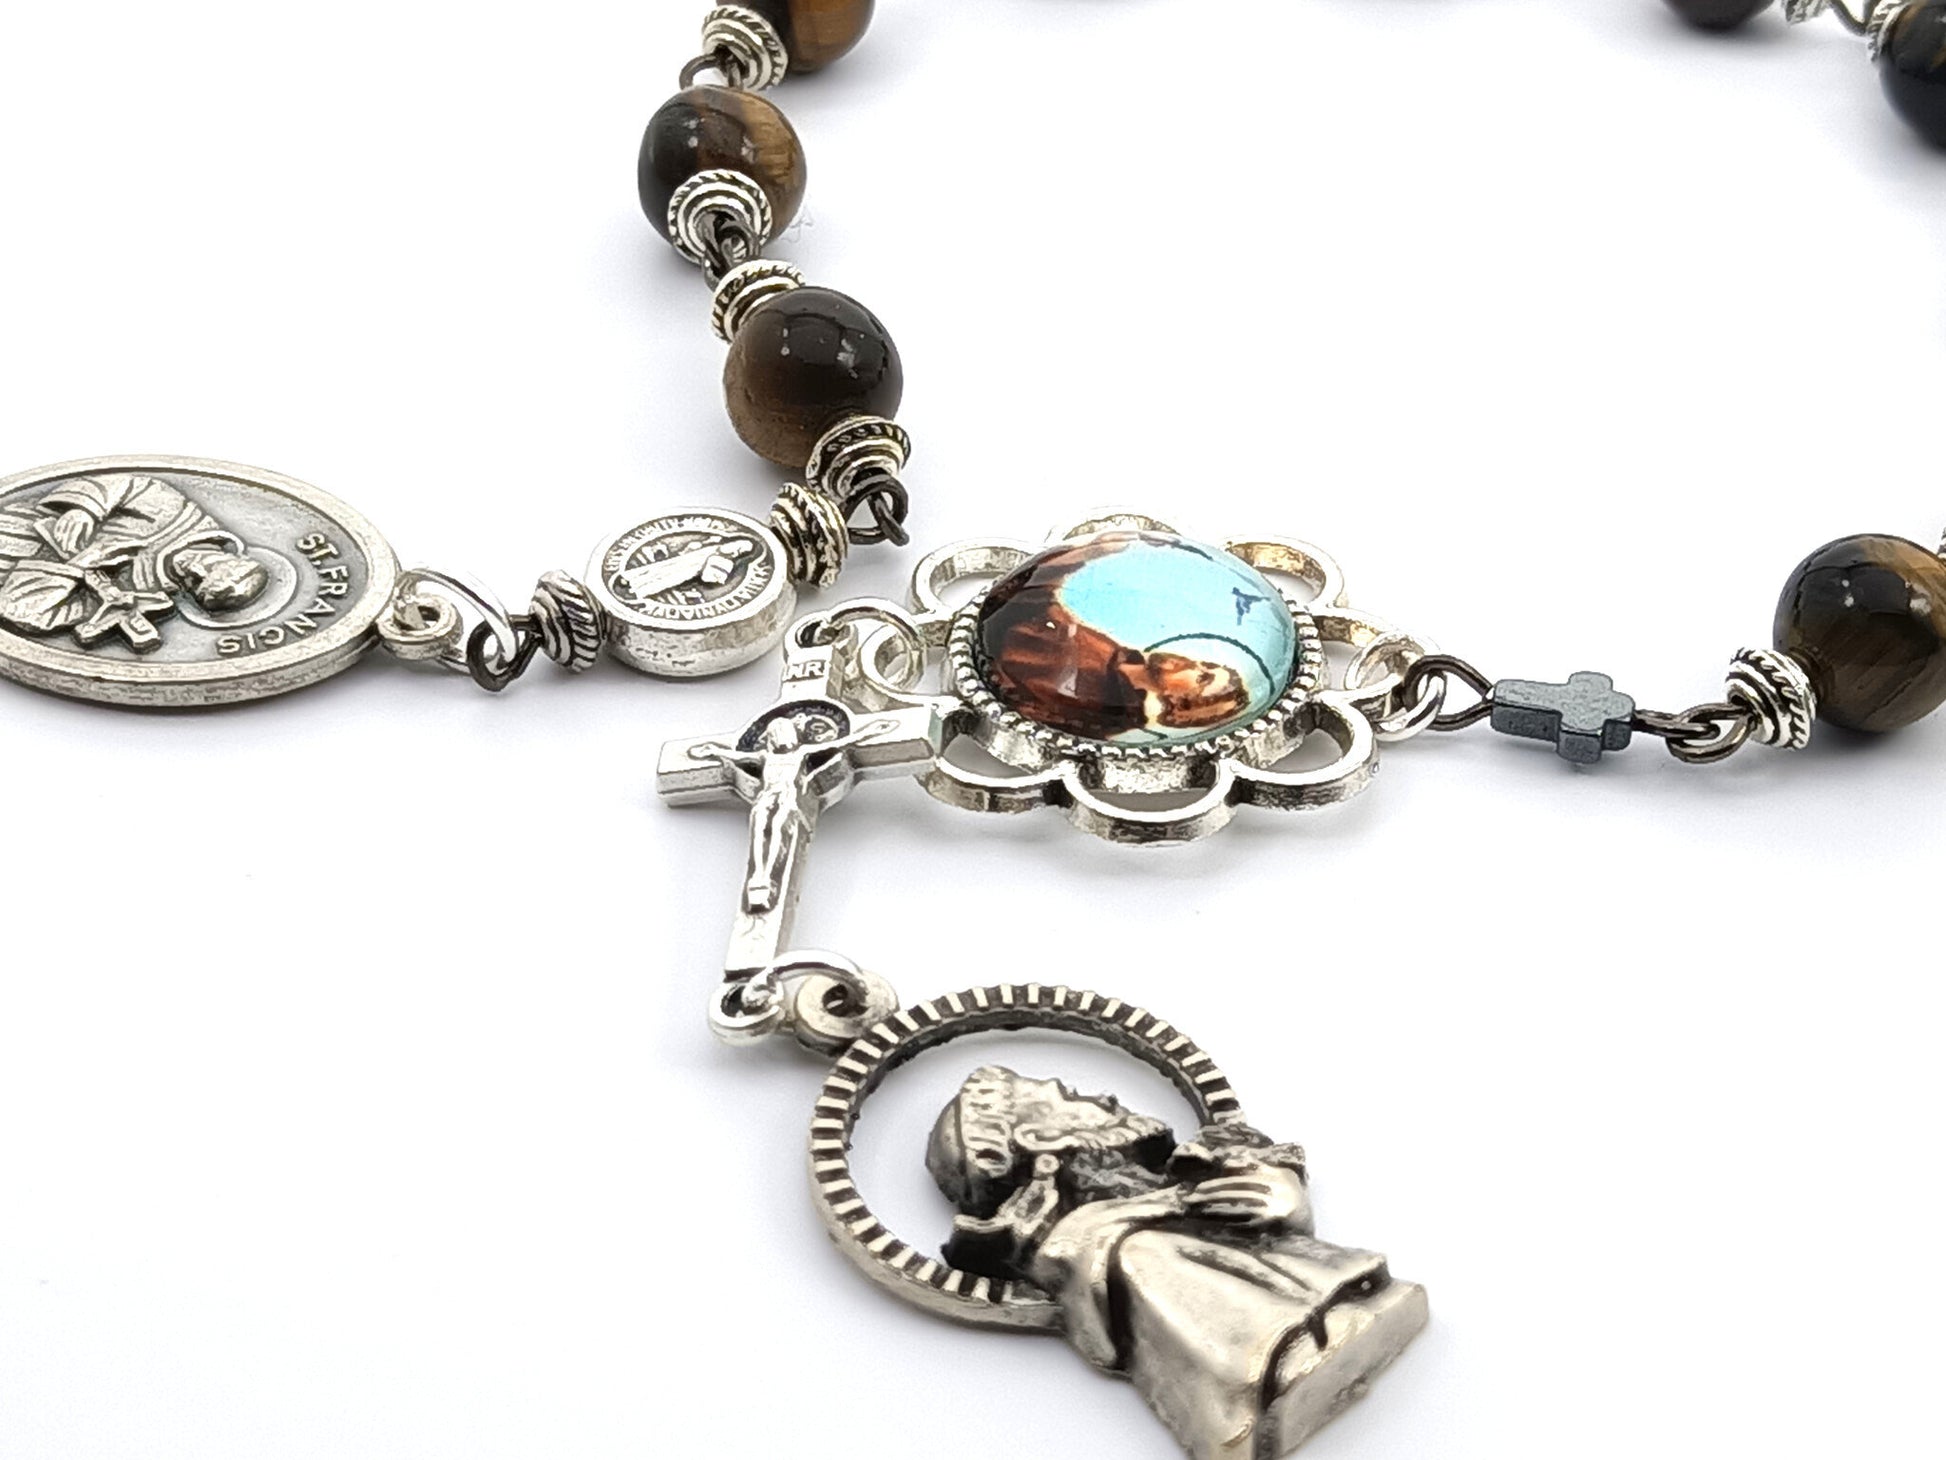 Saint Francis of Assisi unique rosary beads single decade with tigers eye gemstone beads, silver crucifix, medals and picture medal pater bead.